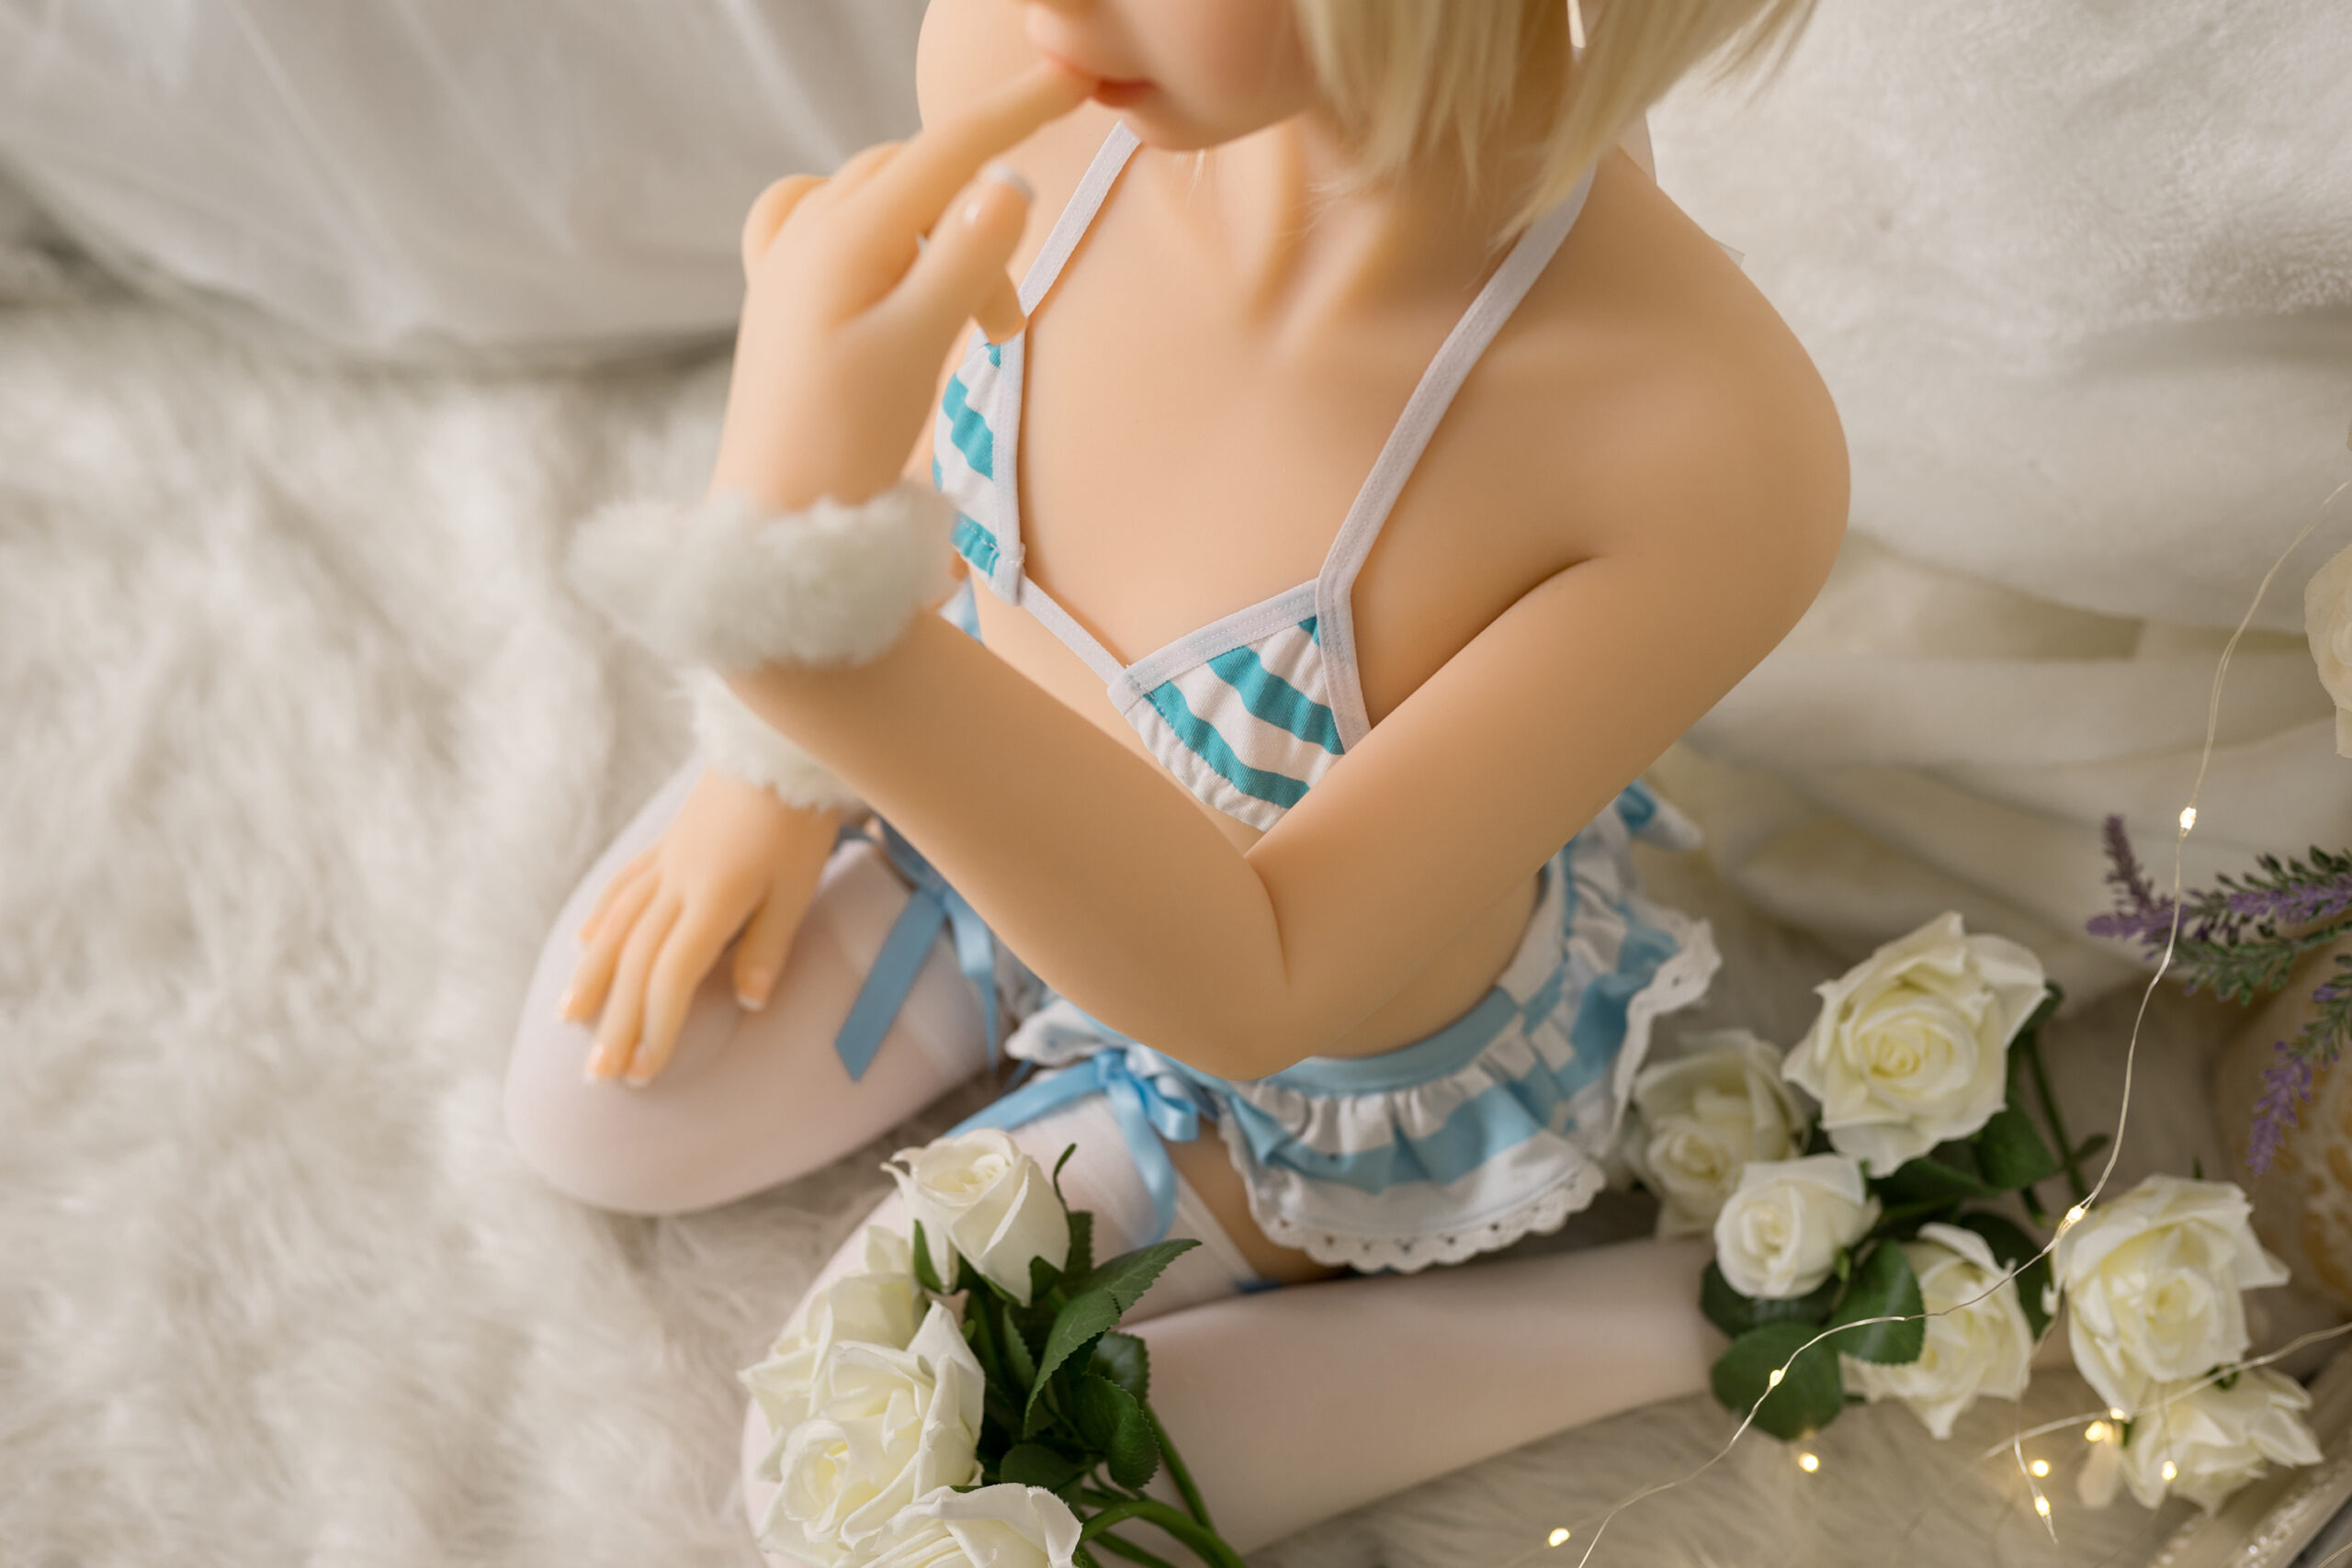 flat chest sex doll with smooth skin